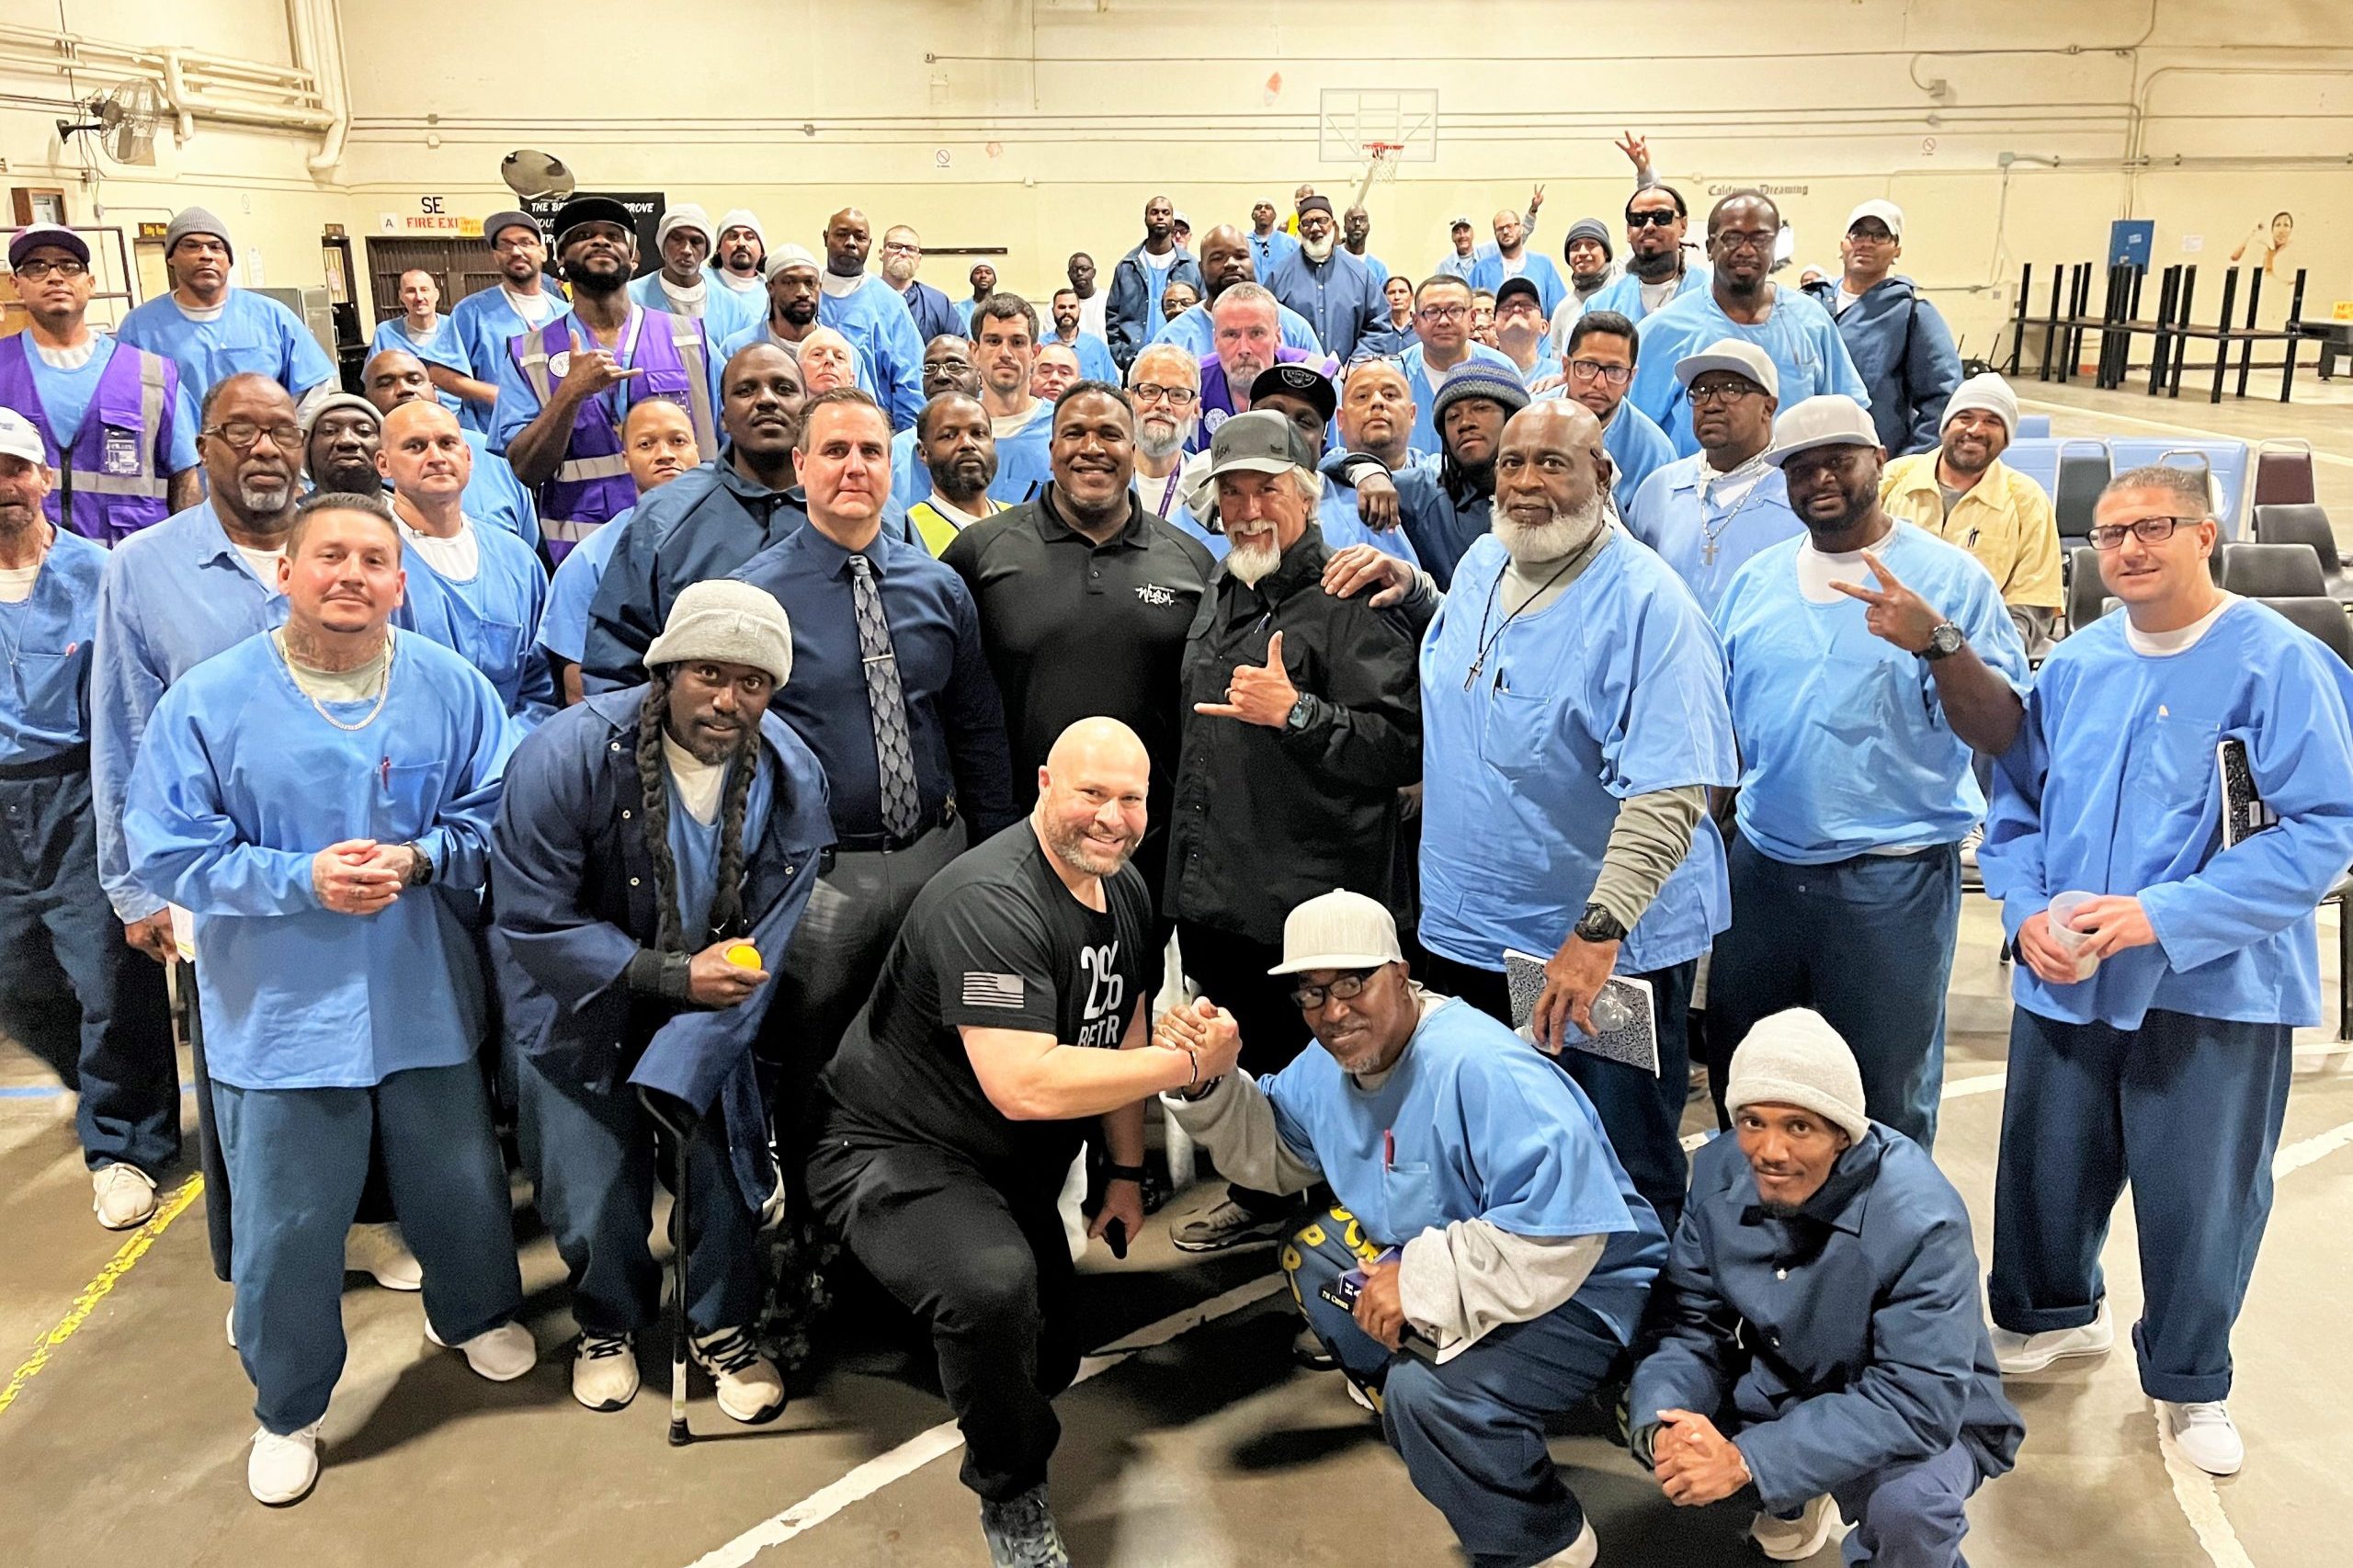 Staff and the population were offered special training to improve interactions within the Correctional Training Facility at Soledad. The photo shows mostly incarcerated people posing with a few staff members and the trainer.